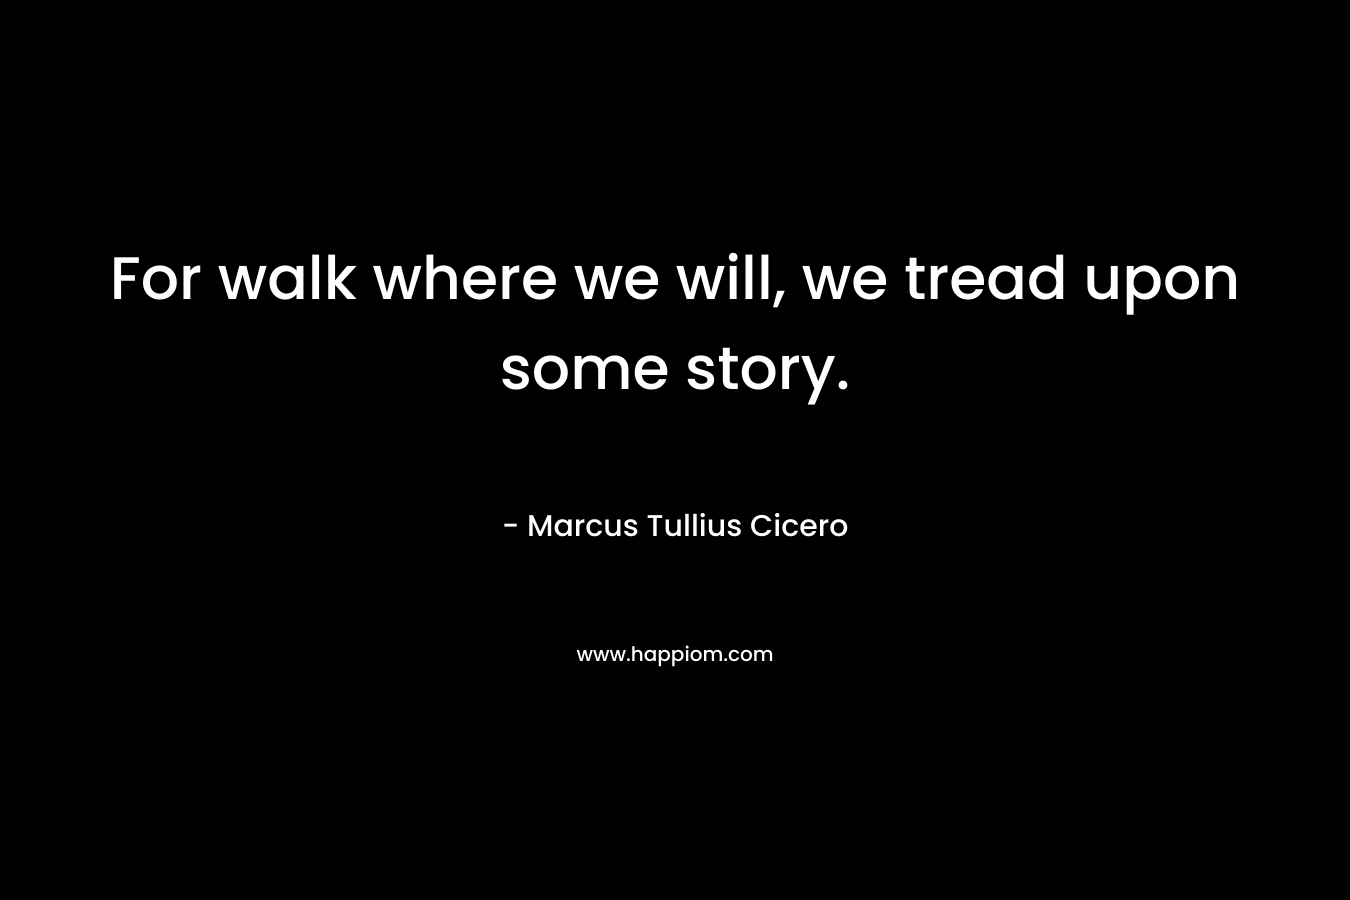 For walk where we will, we tread upon some story. – Marcus Tullius Cicero